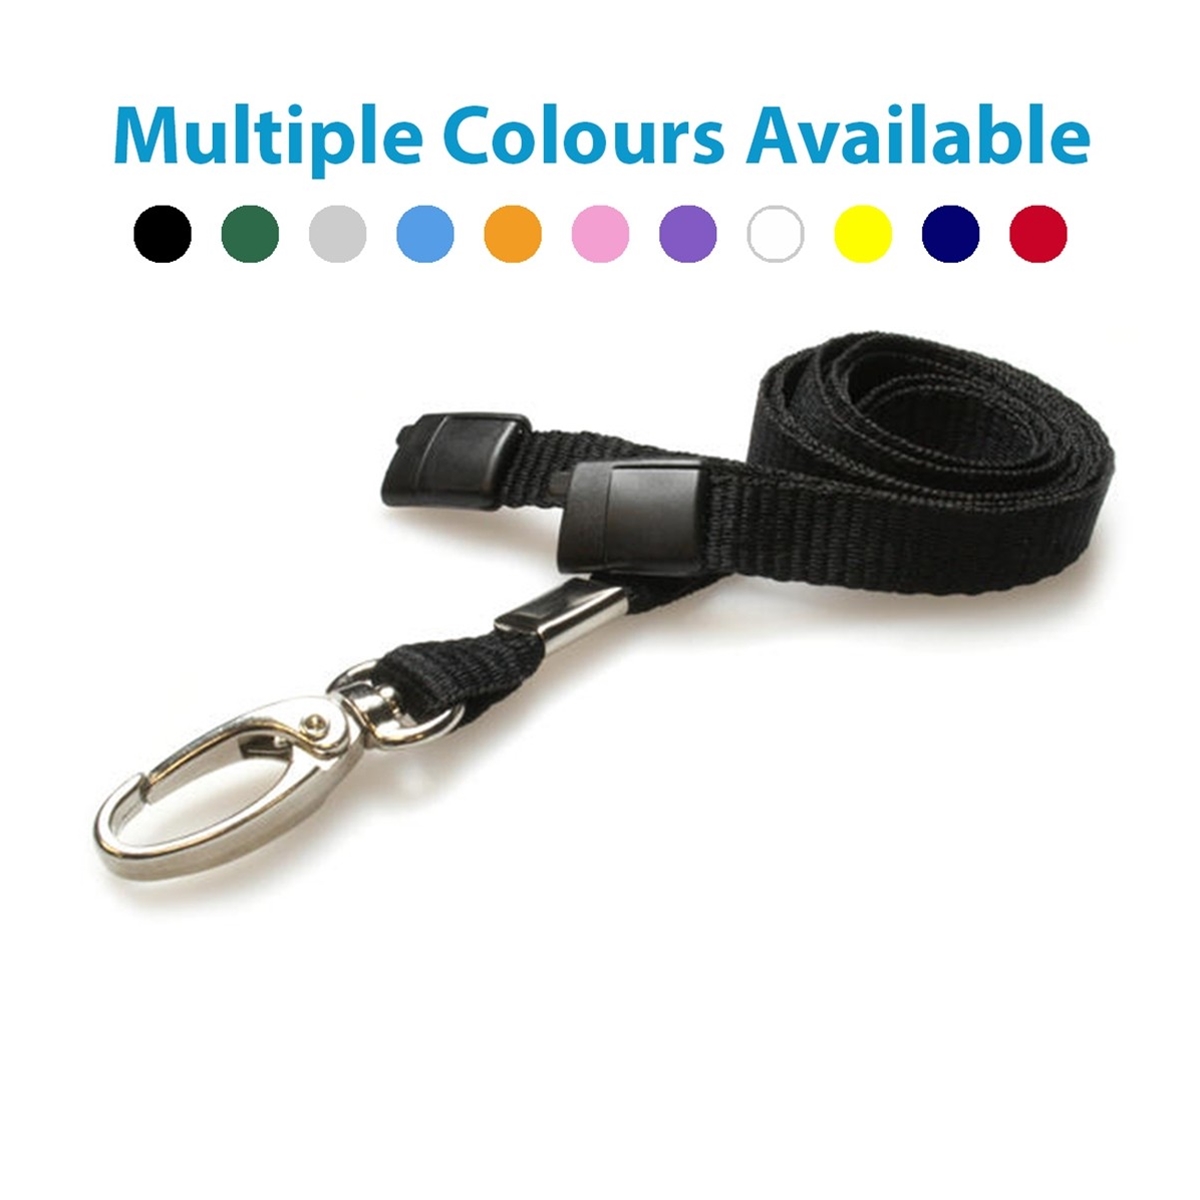 black plain lanyard with a metal hook and plastic breakaway showing multiple colours available